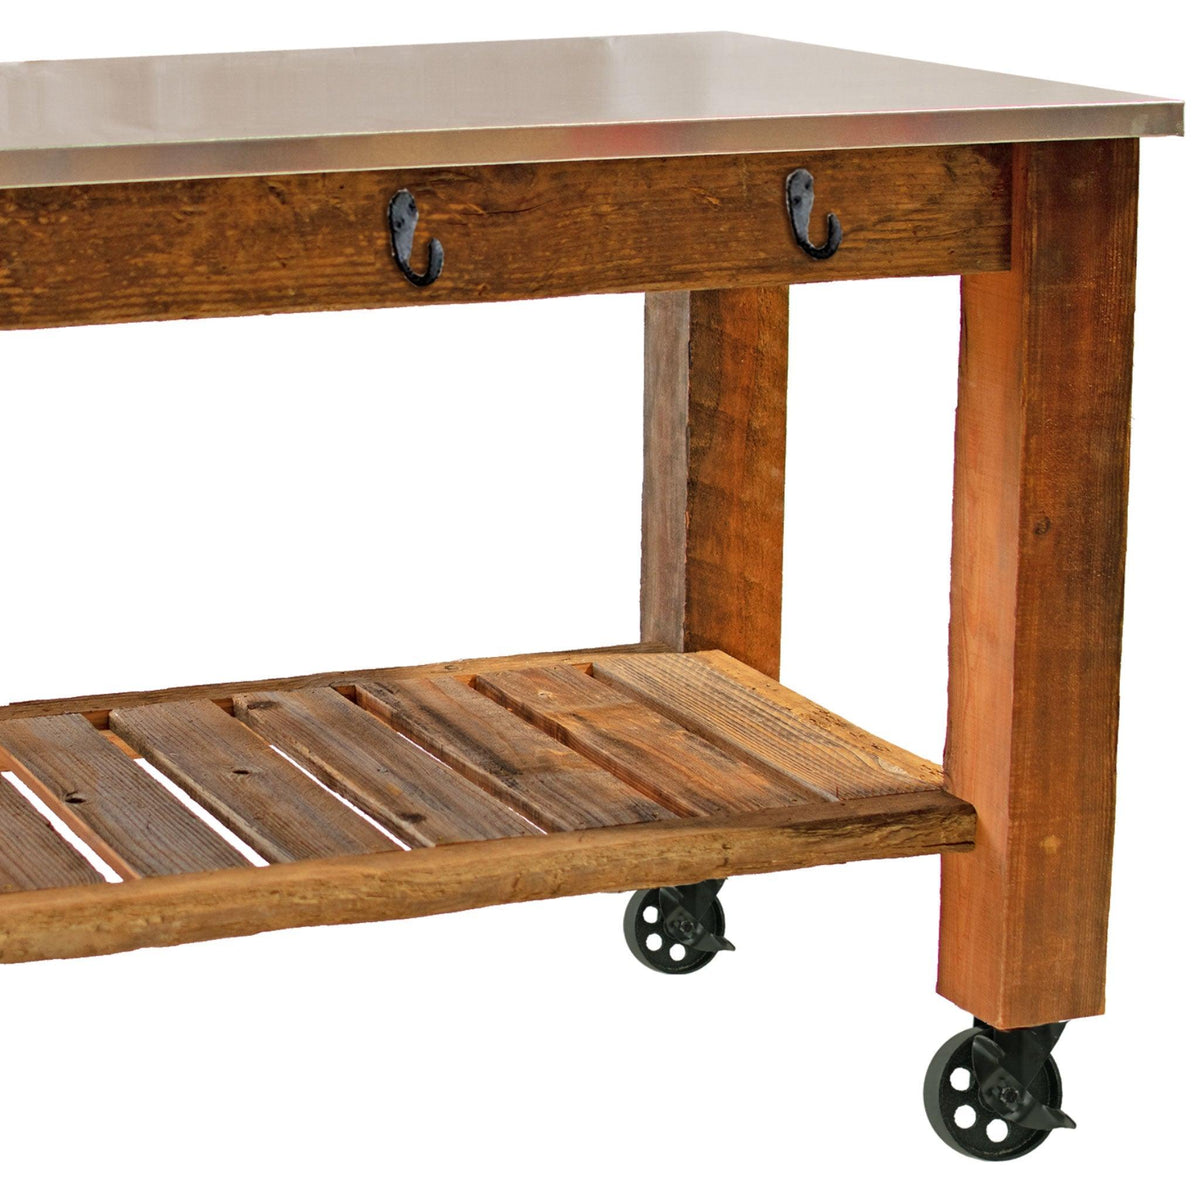 Corner photo of Lee Display's Redwood Potting Table Rolling Cart with 5in Black Casters with Hardware Included on sale now at leedisplay.com